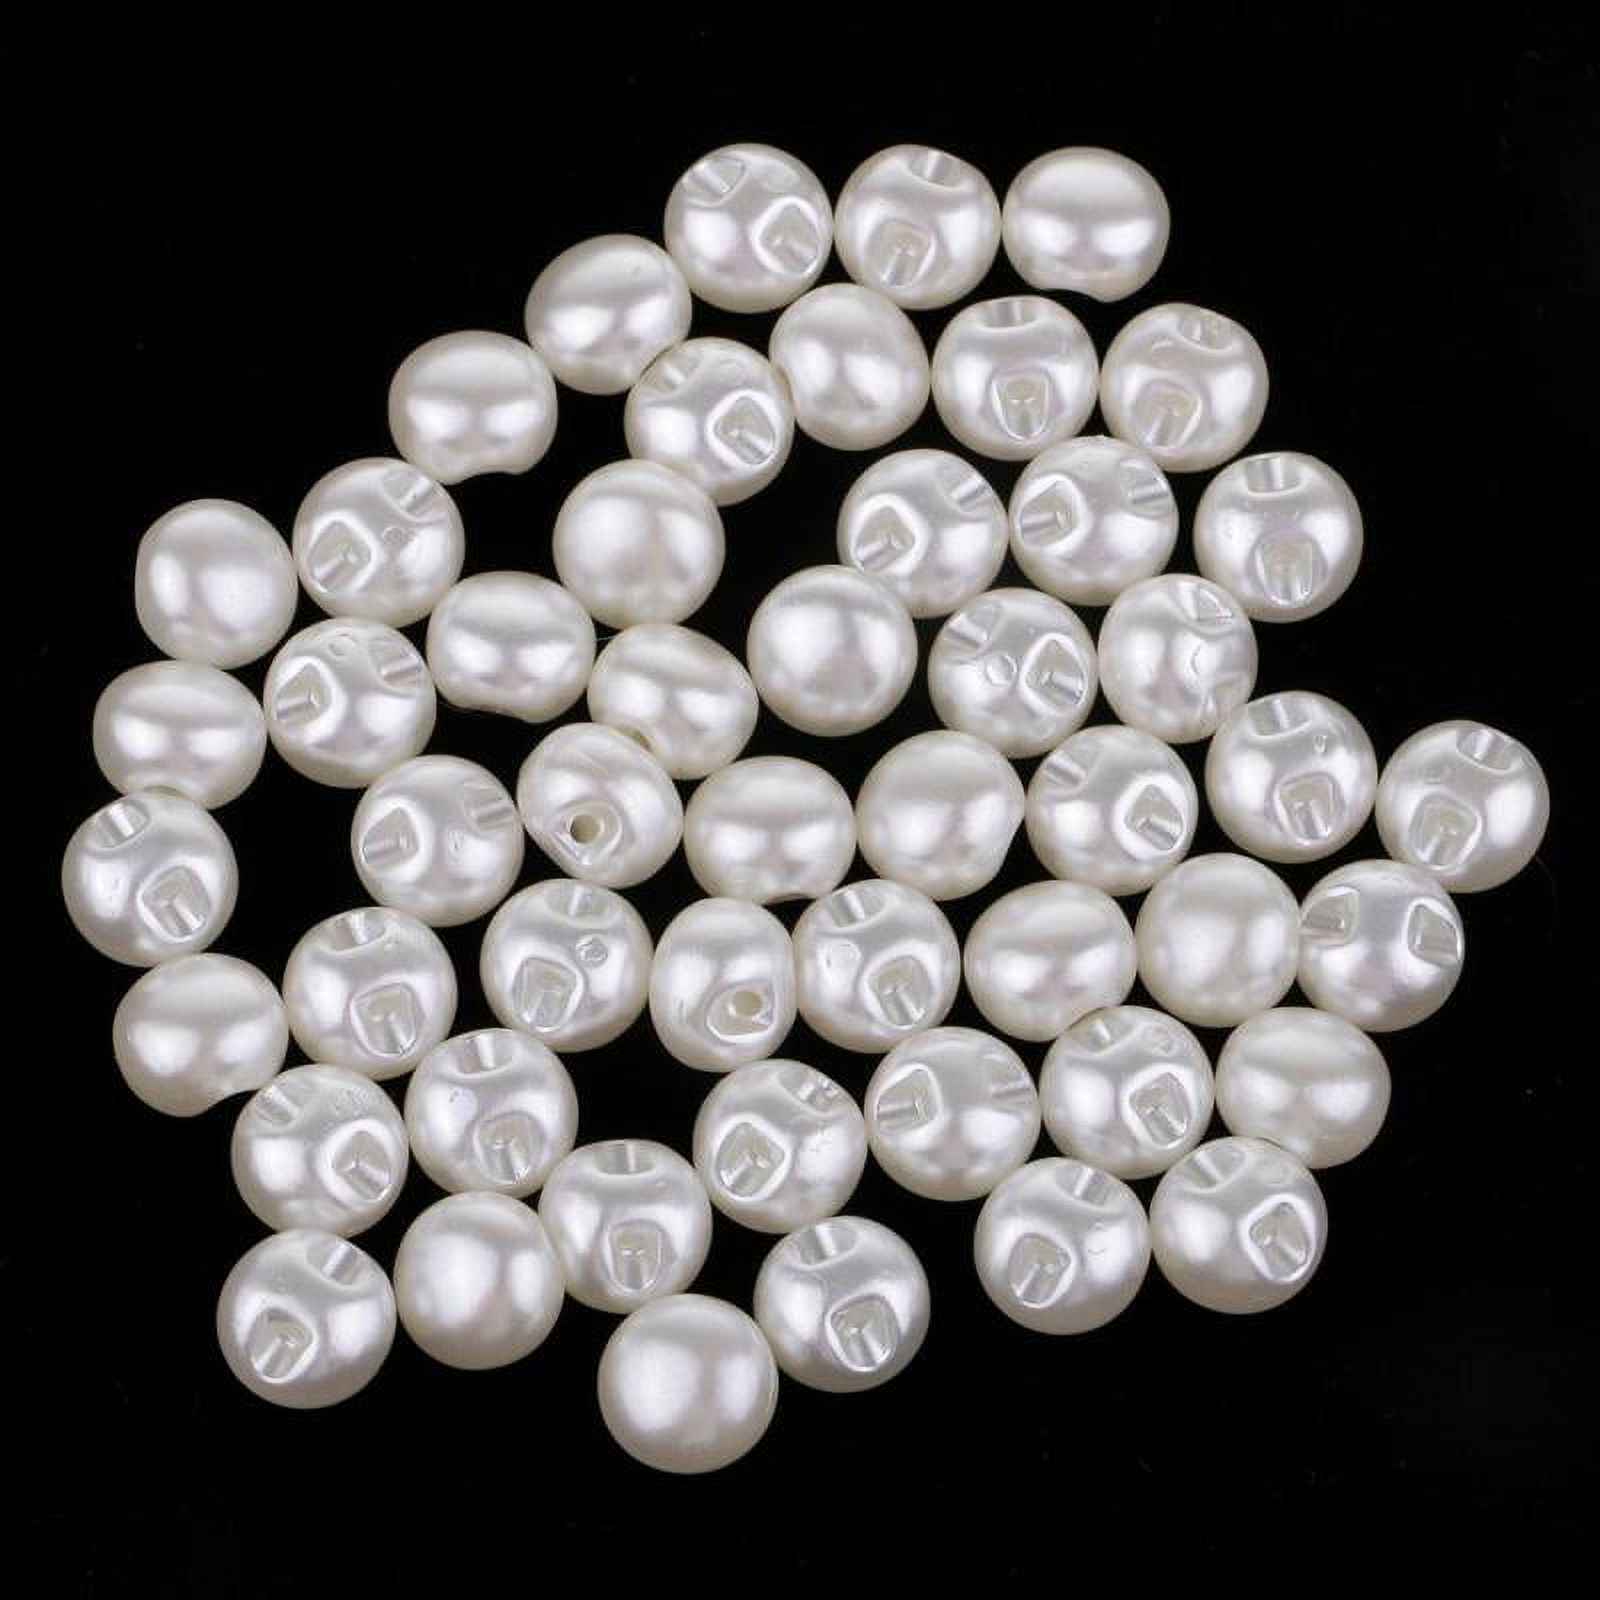 Set of 50 Buttons Pearl Button for Sewing, Decorative Buttons Pearl Pearl Buttons Mother-Of-Pearl Wedding Dress Wedding Decoration, Size: 10 mm, White